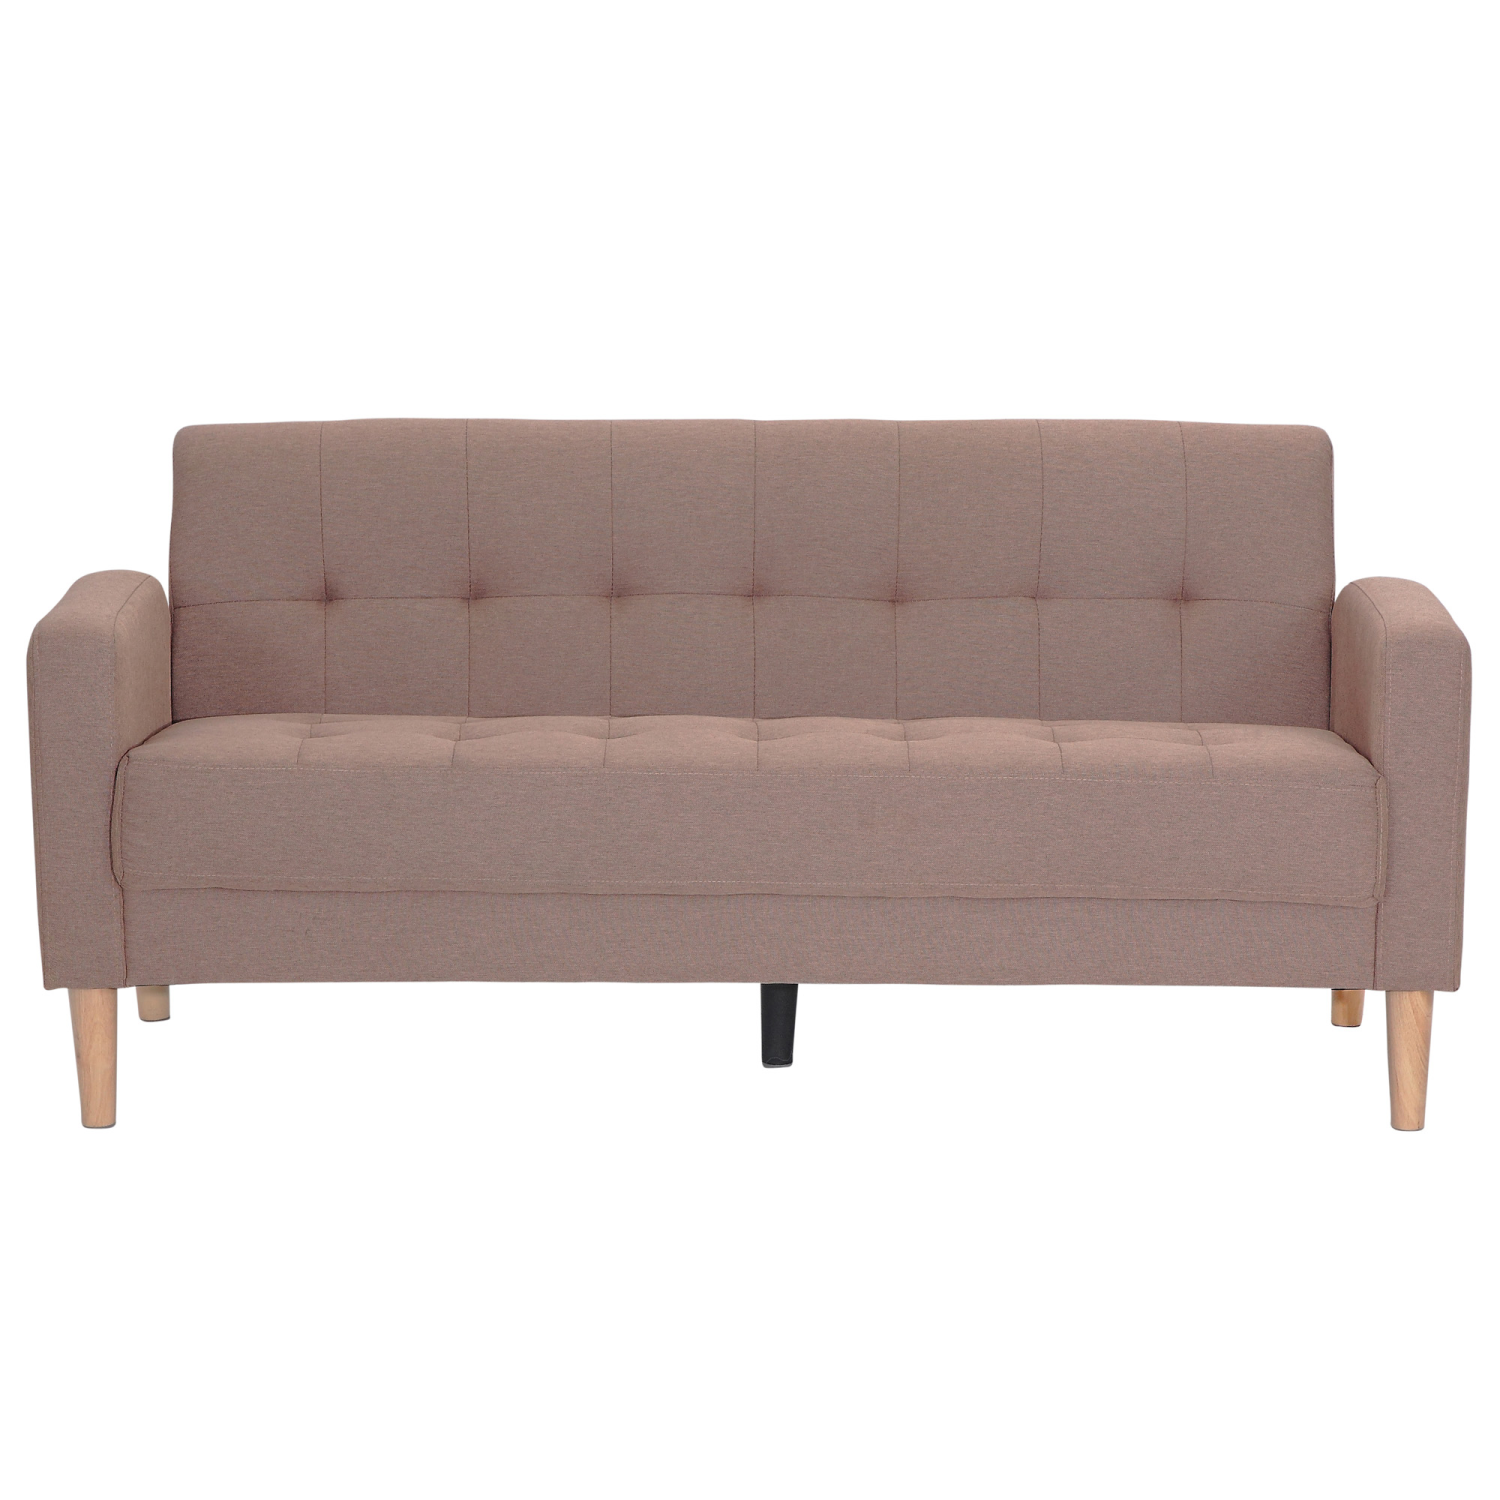 ViscoLogic Mid-Century Modern Sofas Suitable for Small Spaces Sofa - Brown